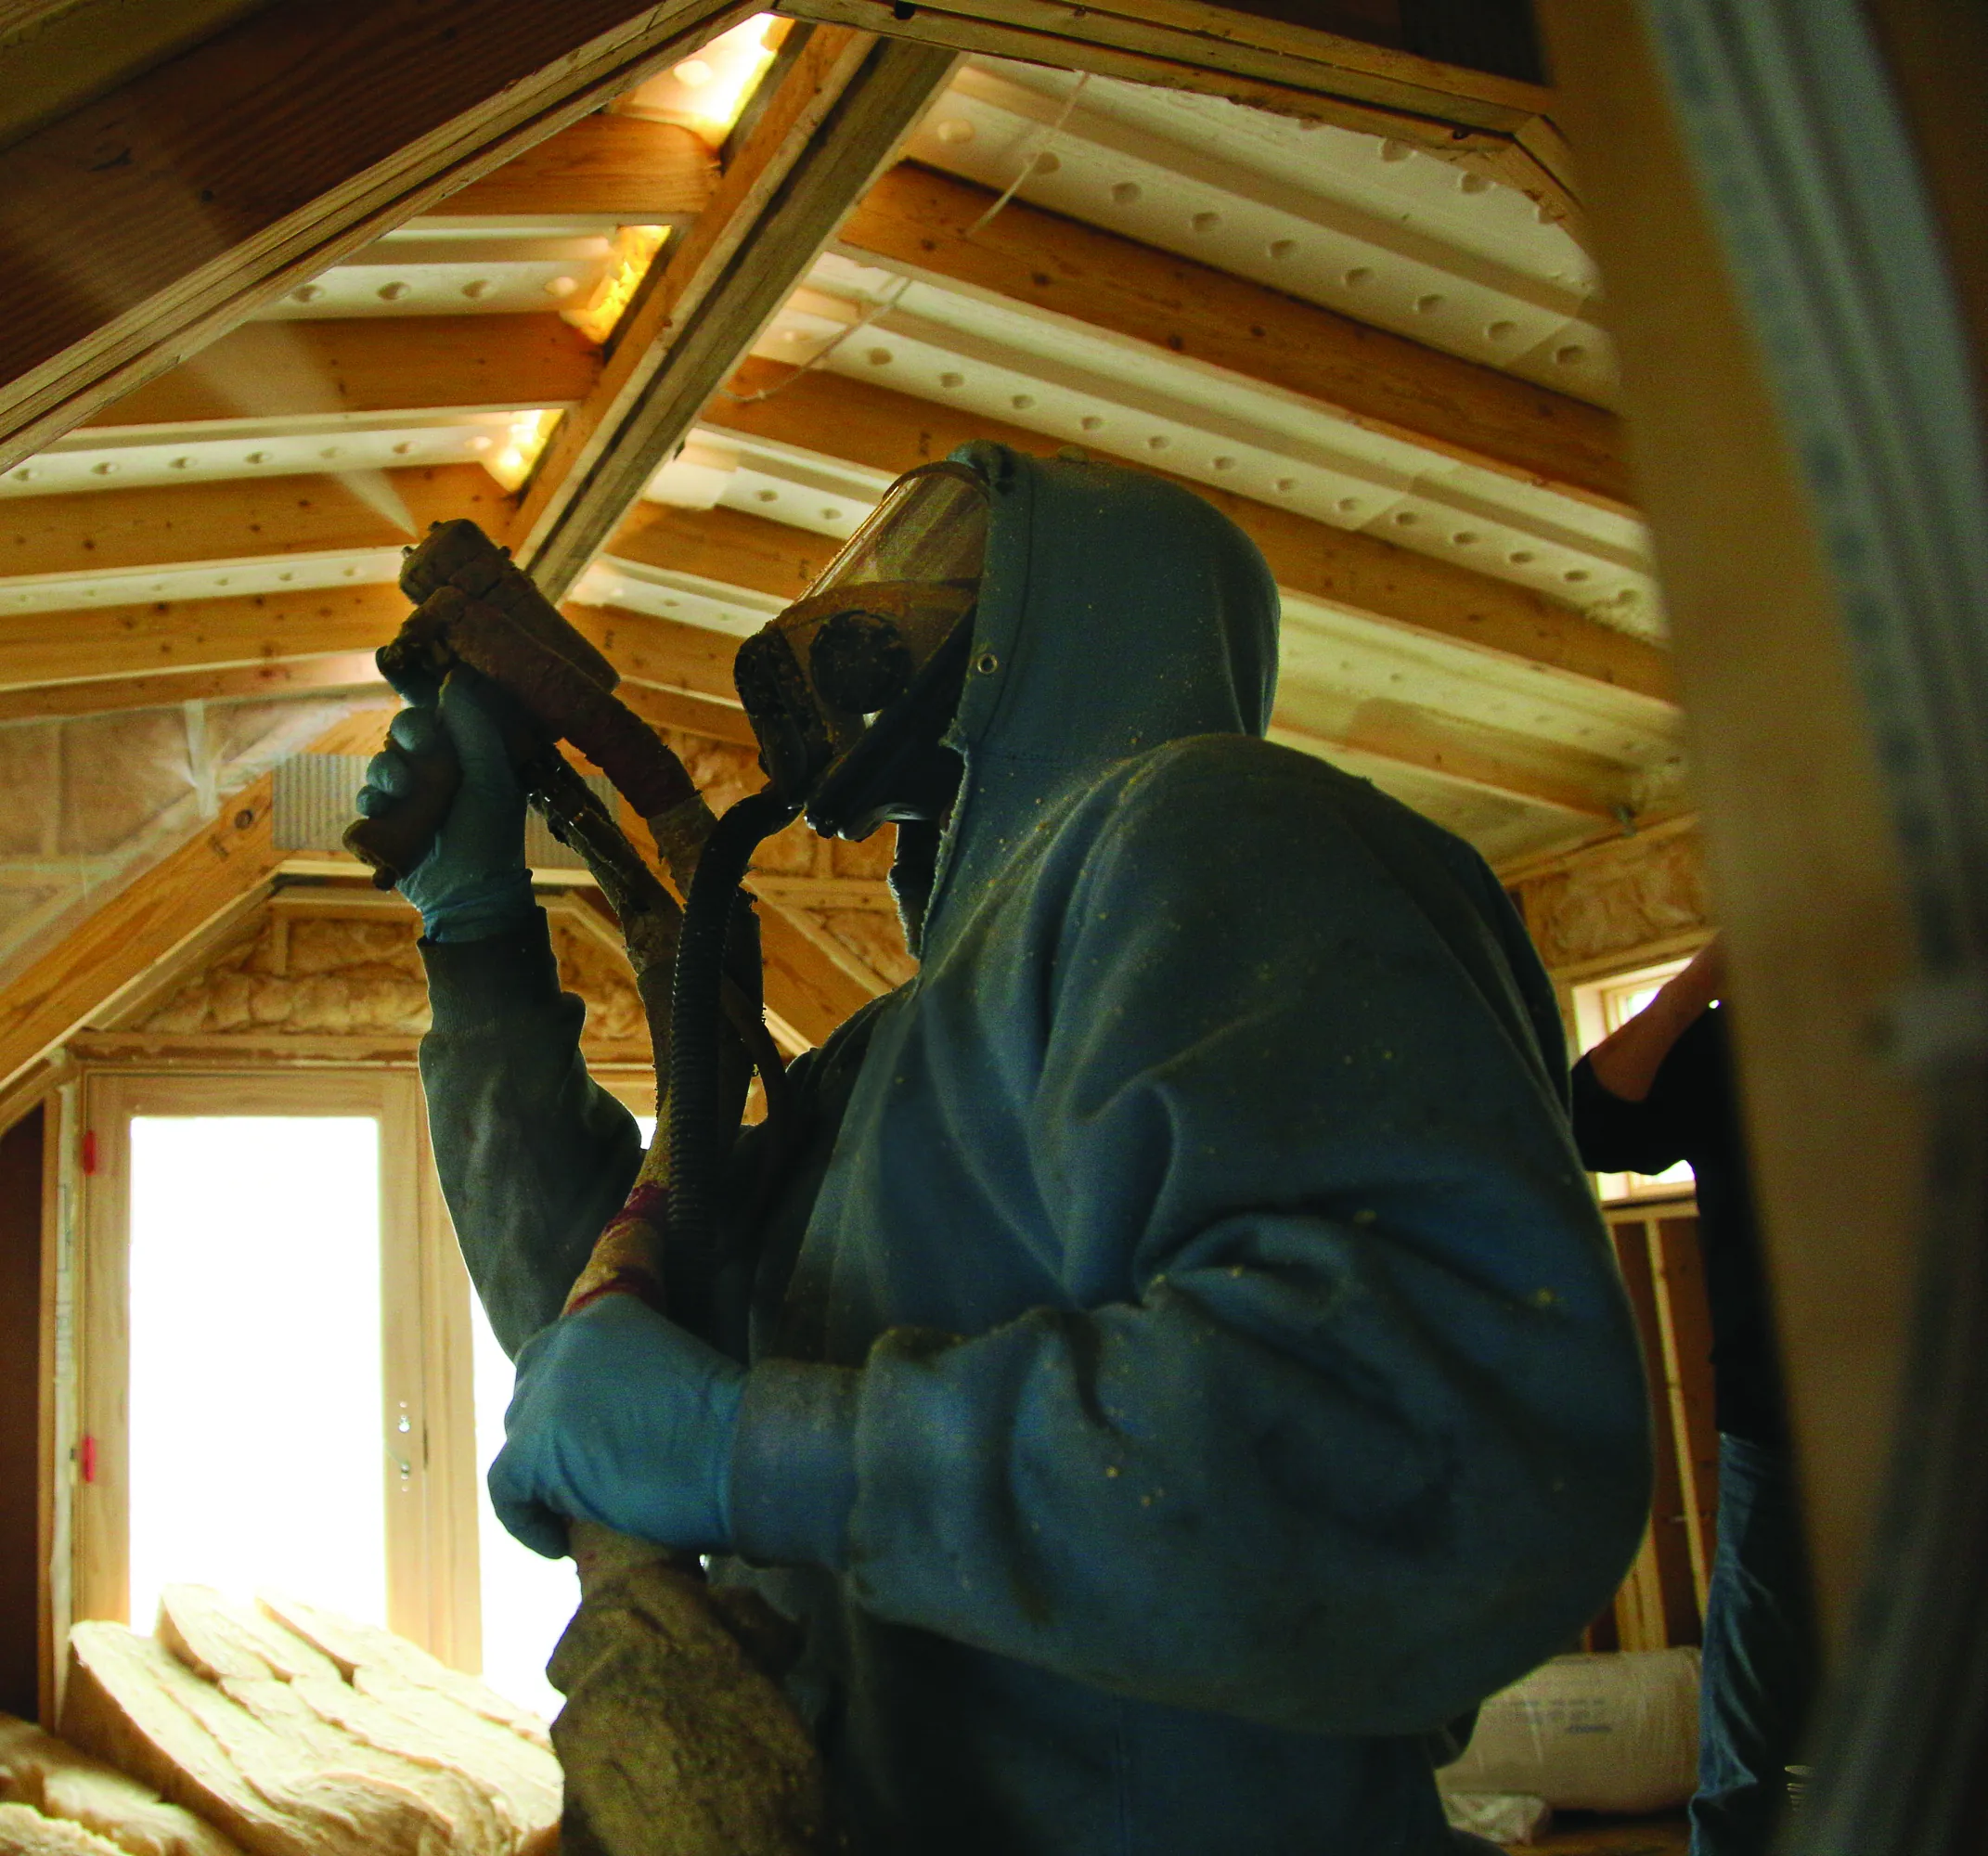 spray foam insulation being installed by technician in hazmat suit, in ceiling of unfinished attic.